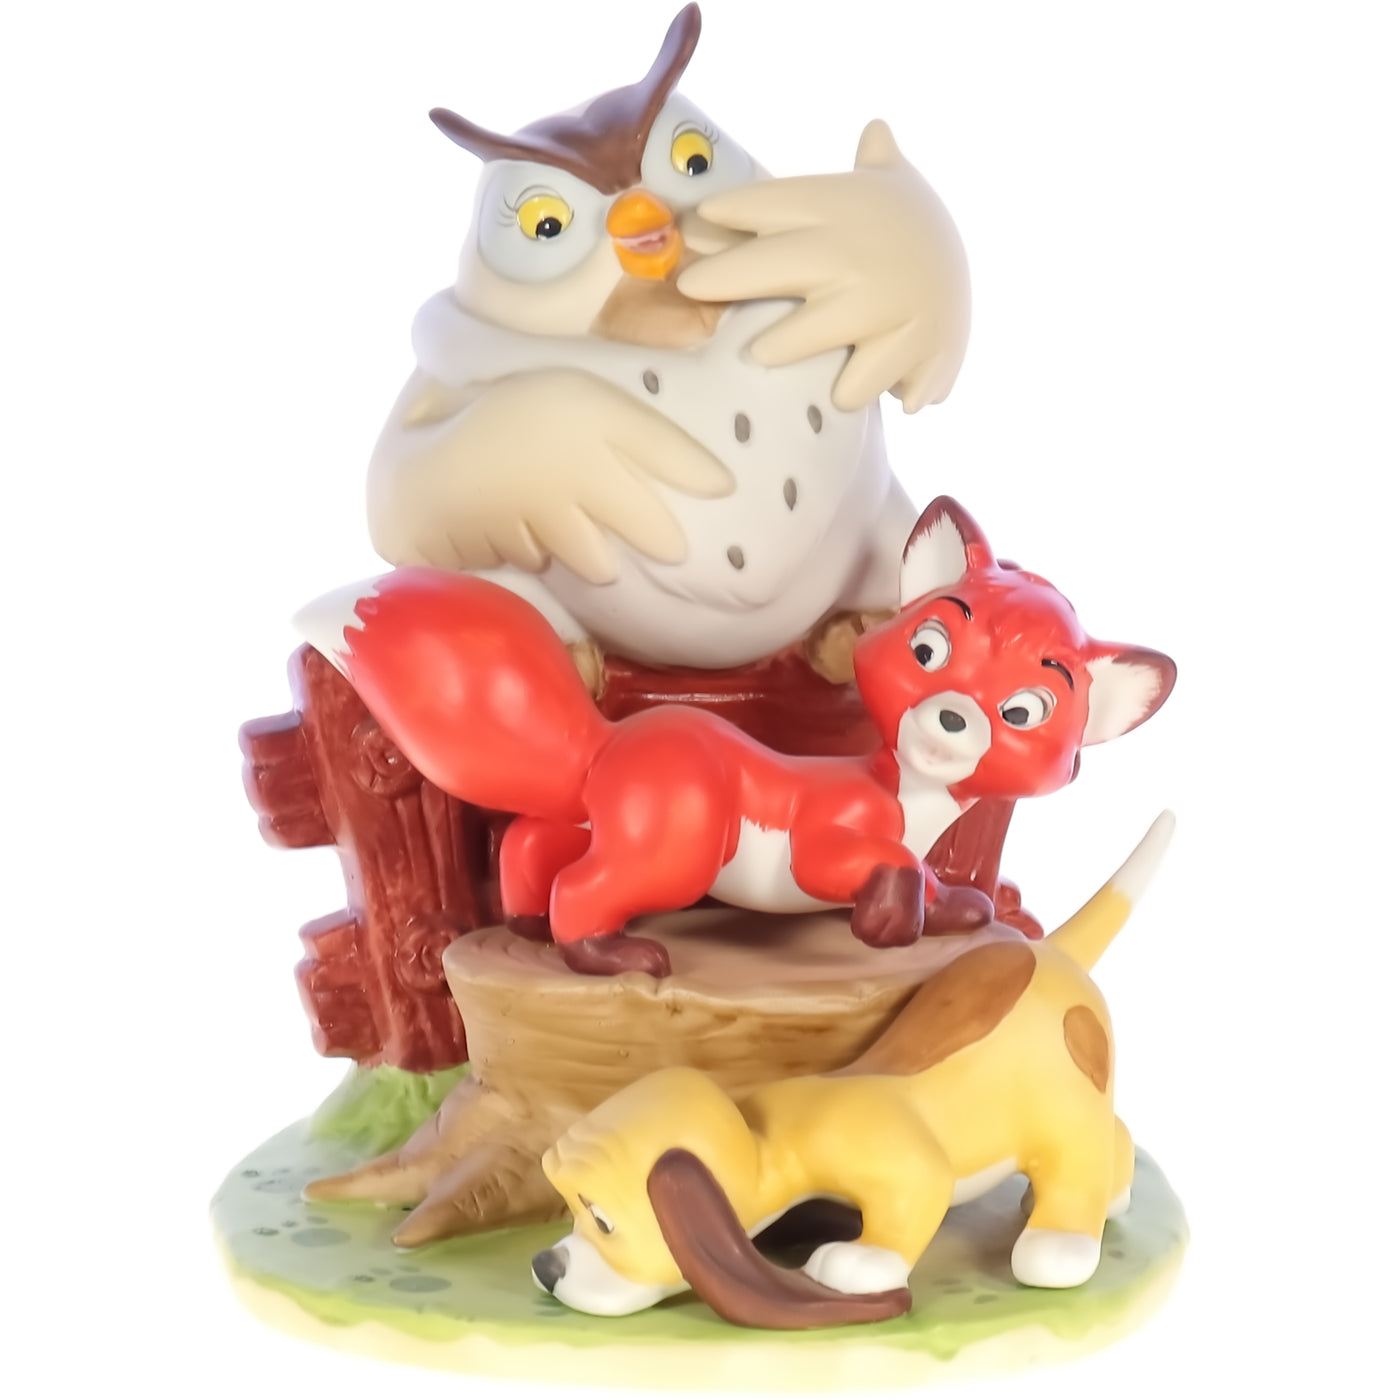 Disney's Magic Memories Porcelain Figurine Limited Edition The Fox and the Hound